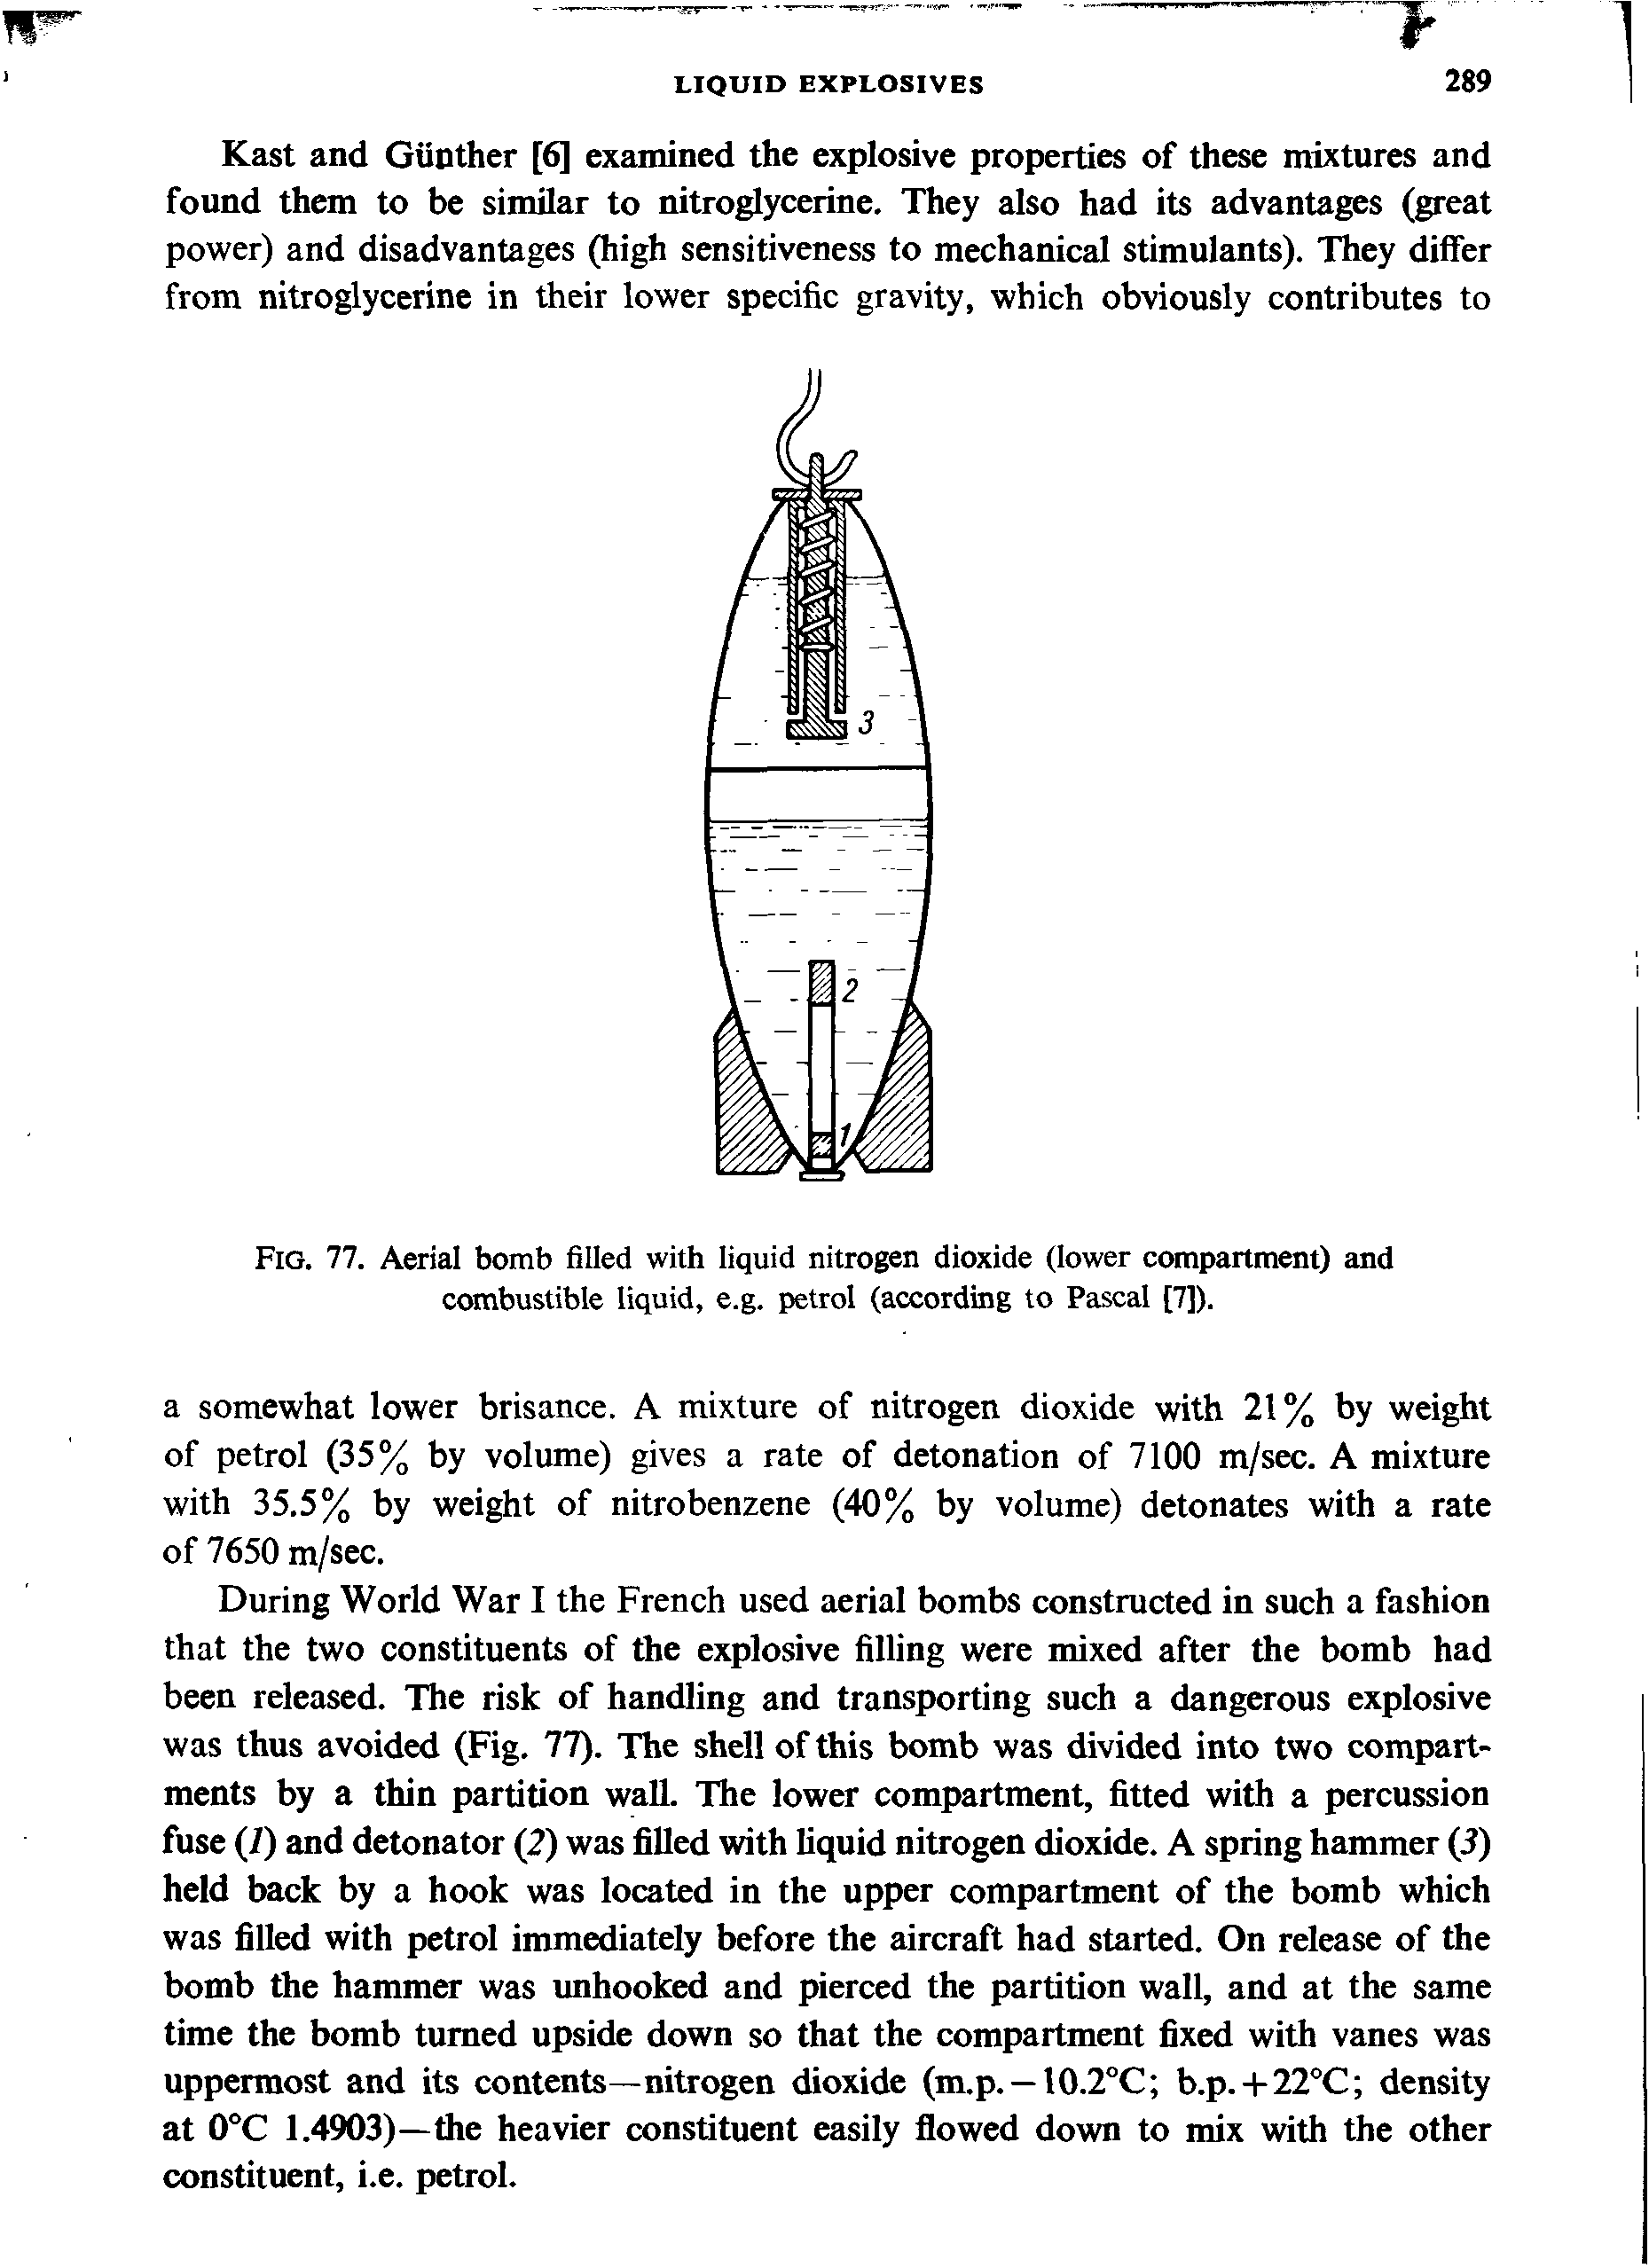 Fig. 77. Aerial bomb filled with liquid nitrogen dioxide (lower compartment) and combustible liquid, e.g. petrol (according to Pascal [7]).